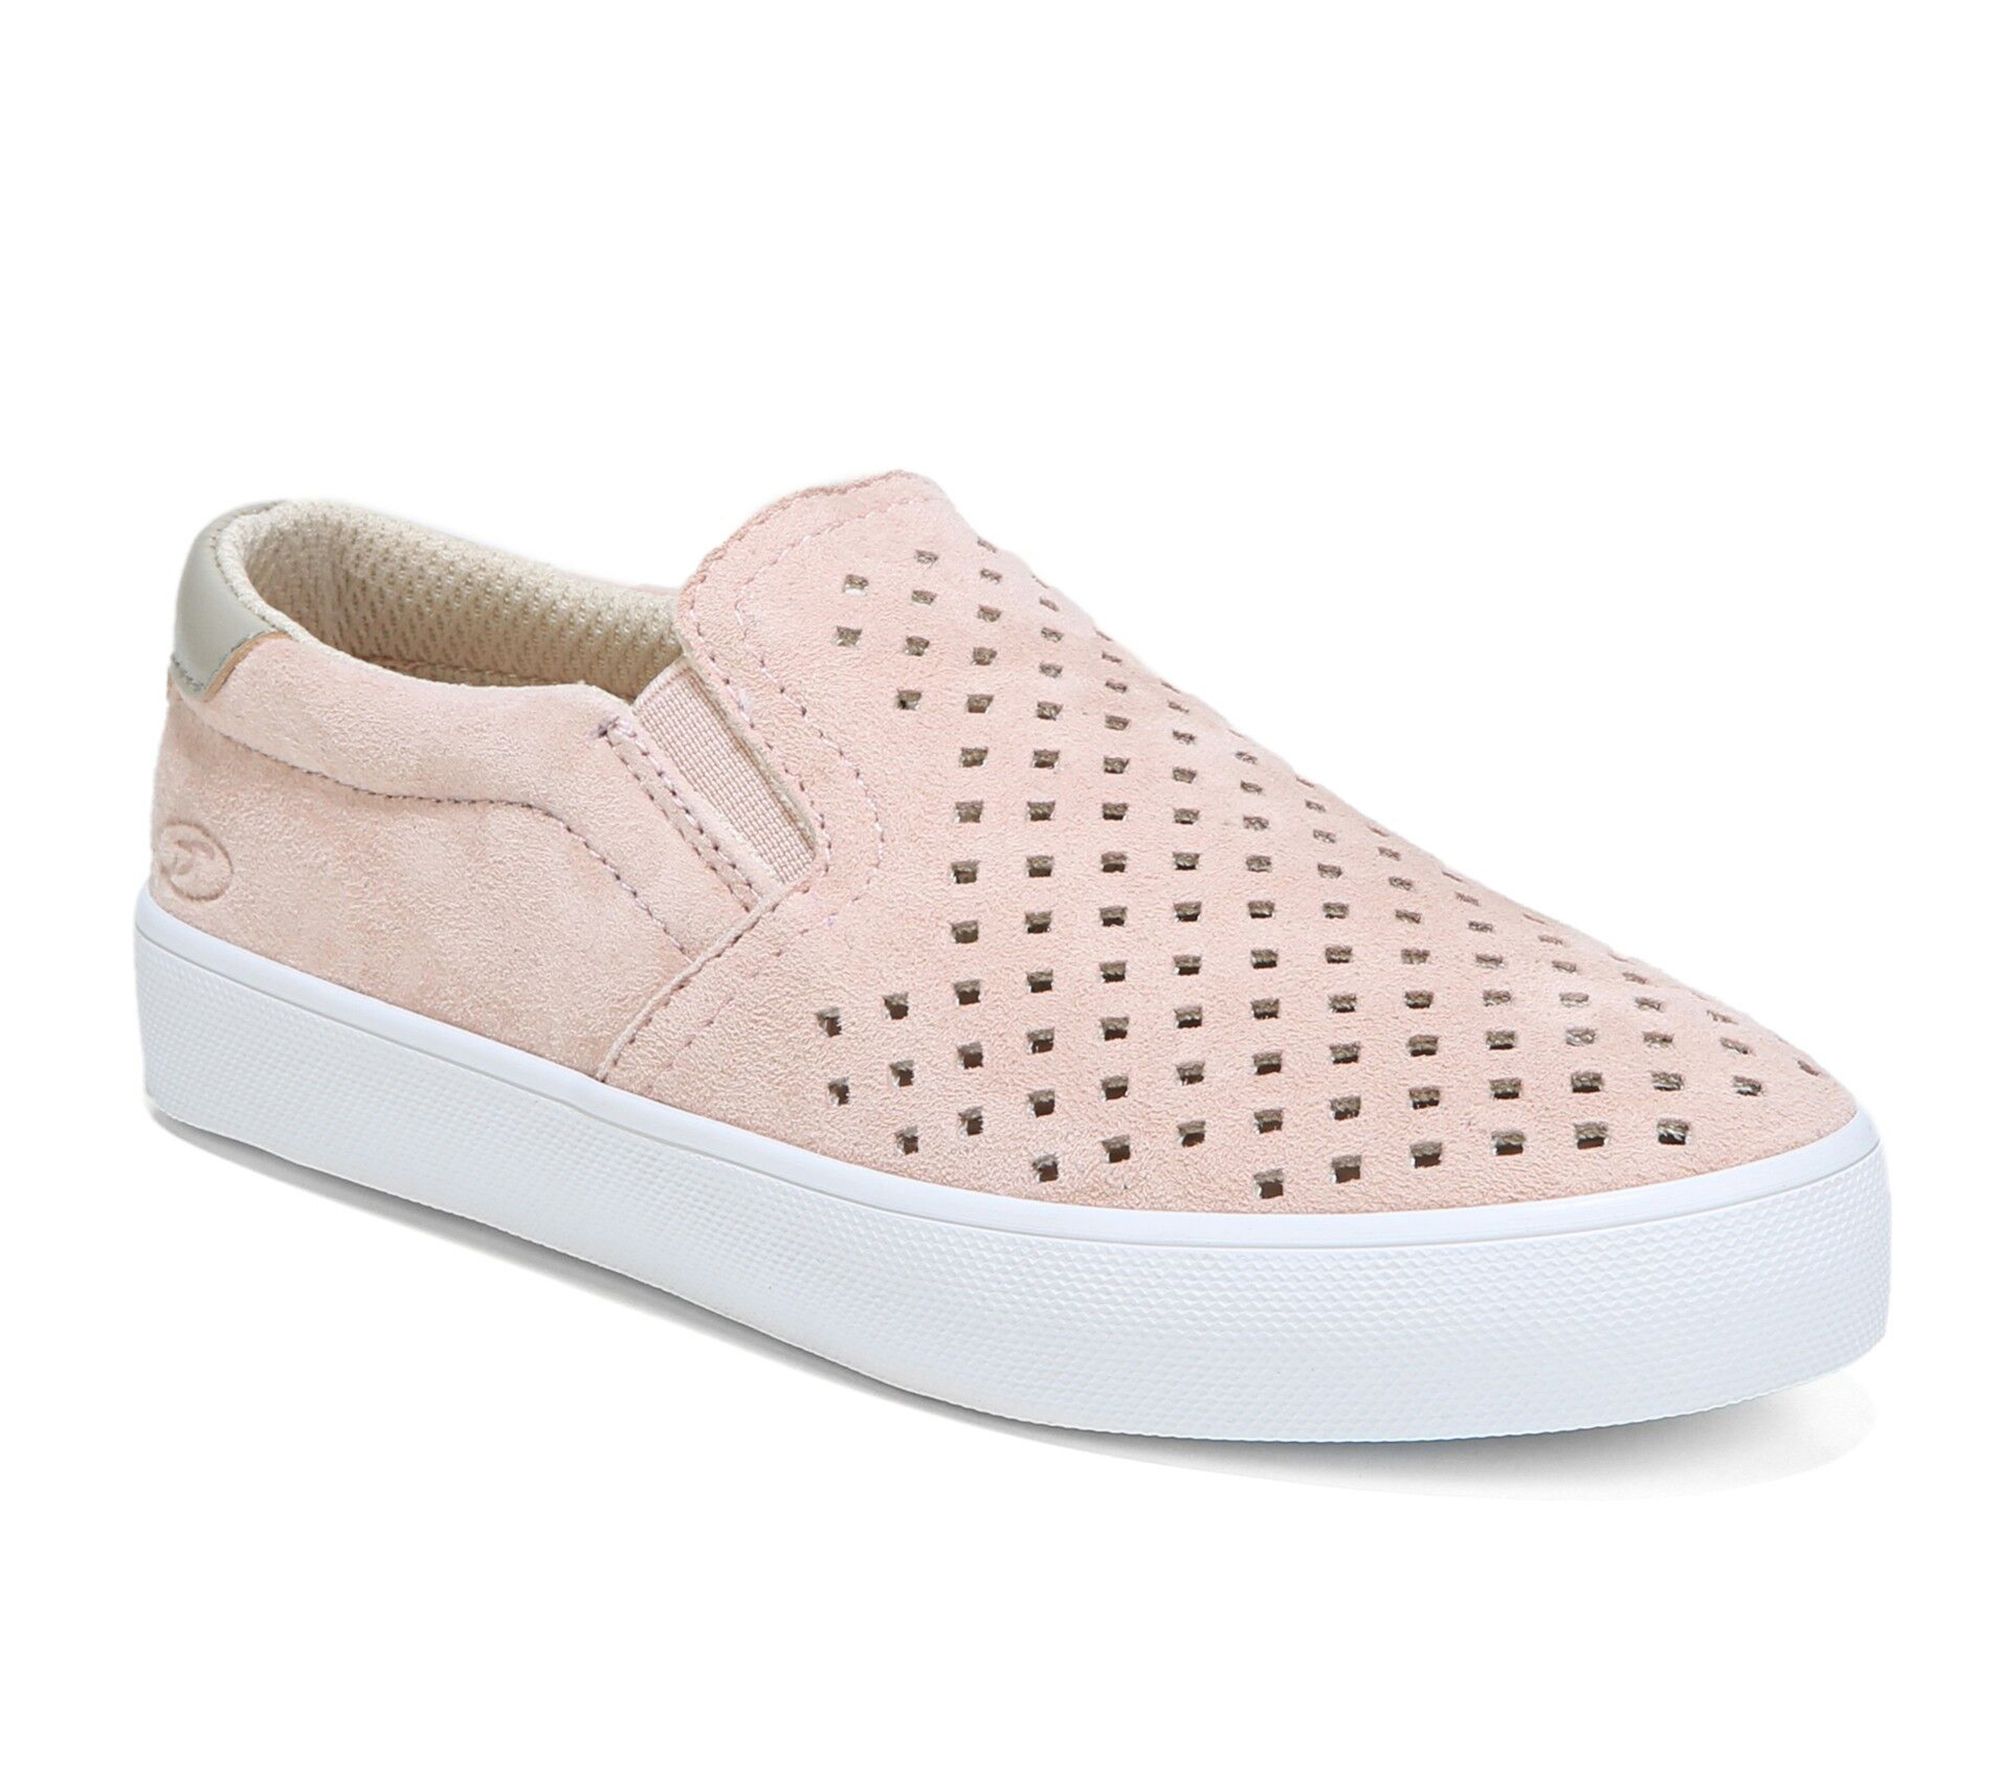 Dr. Scholl's Girl's Slip-On Sneakers - Scout Mss - QVC.com